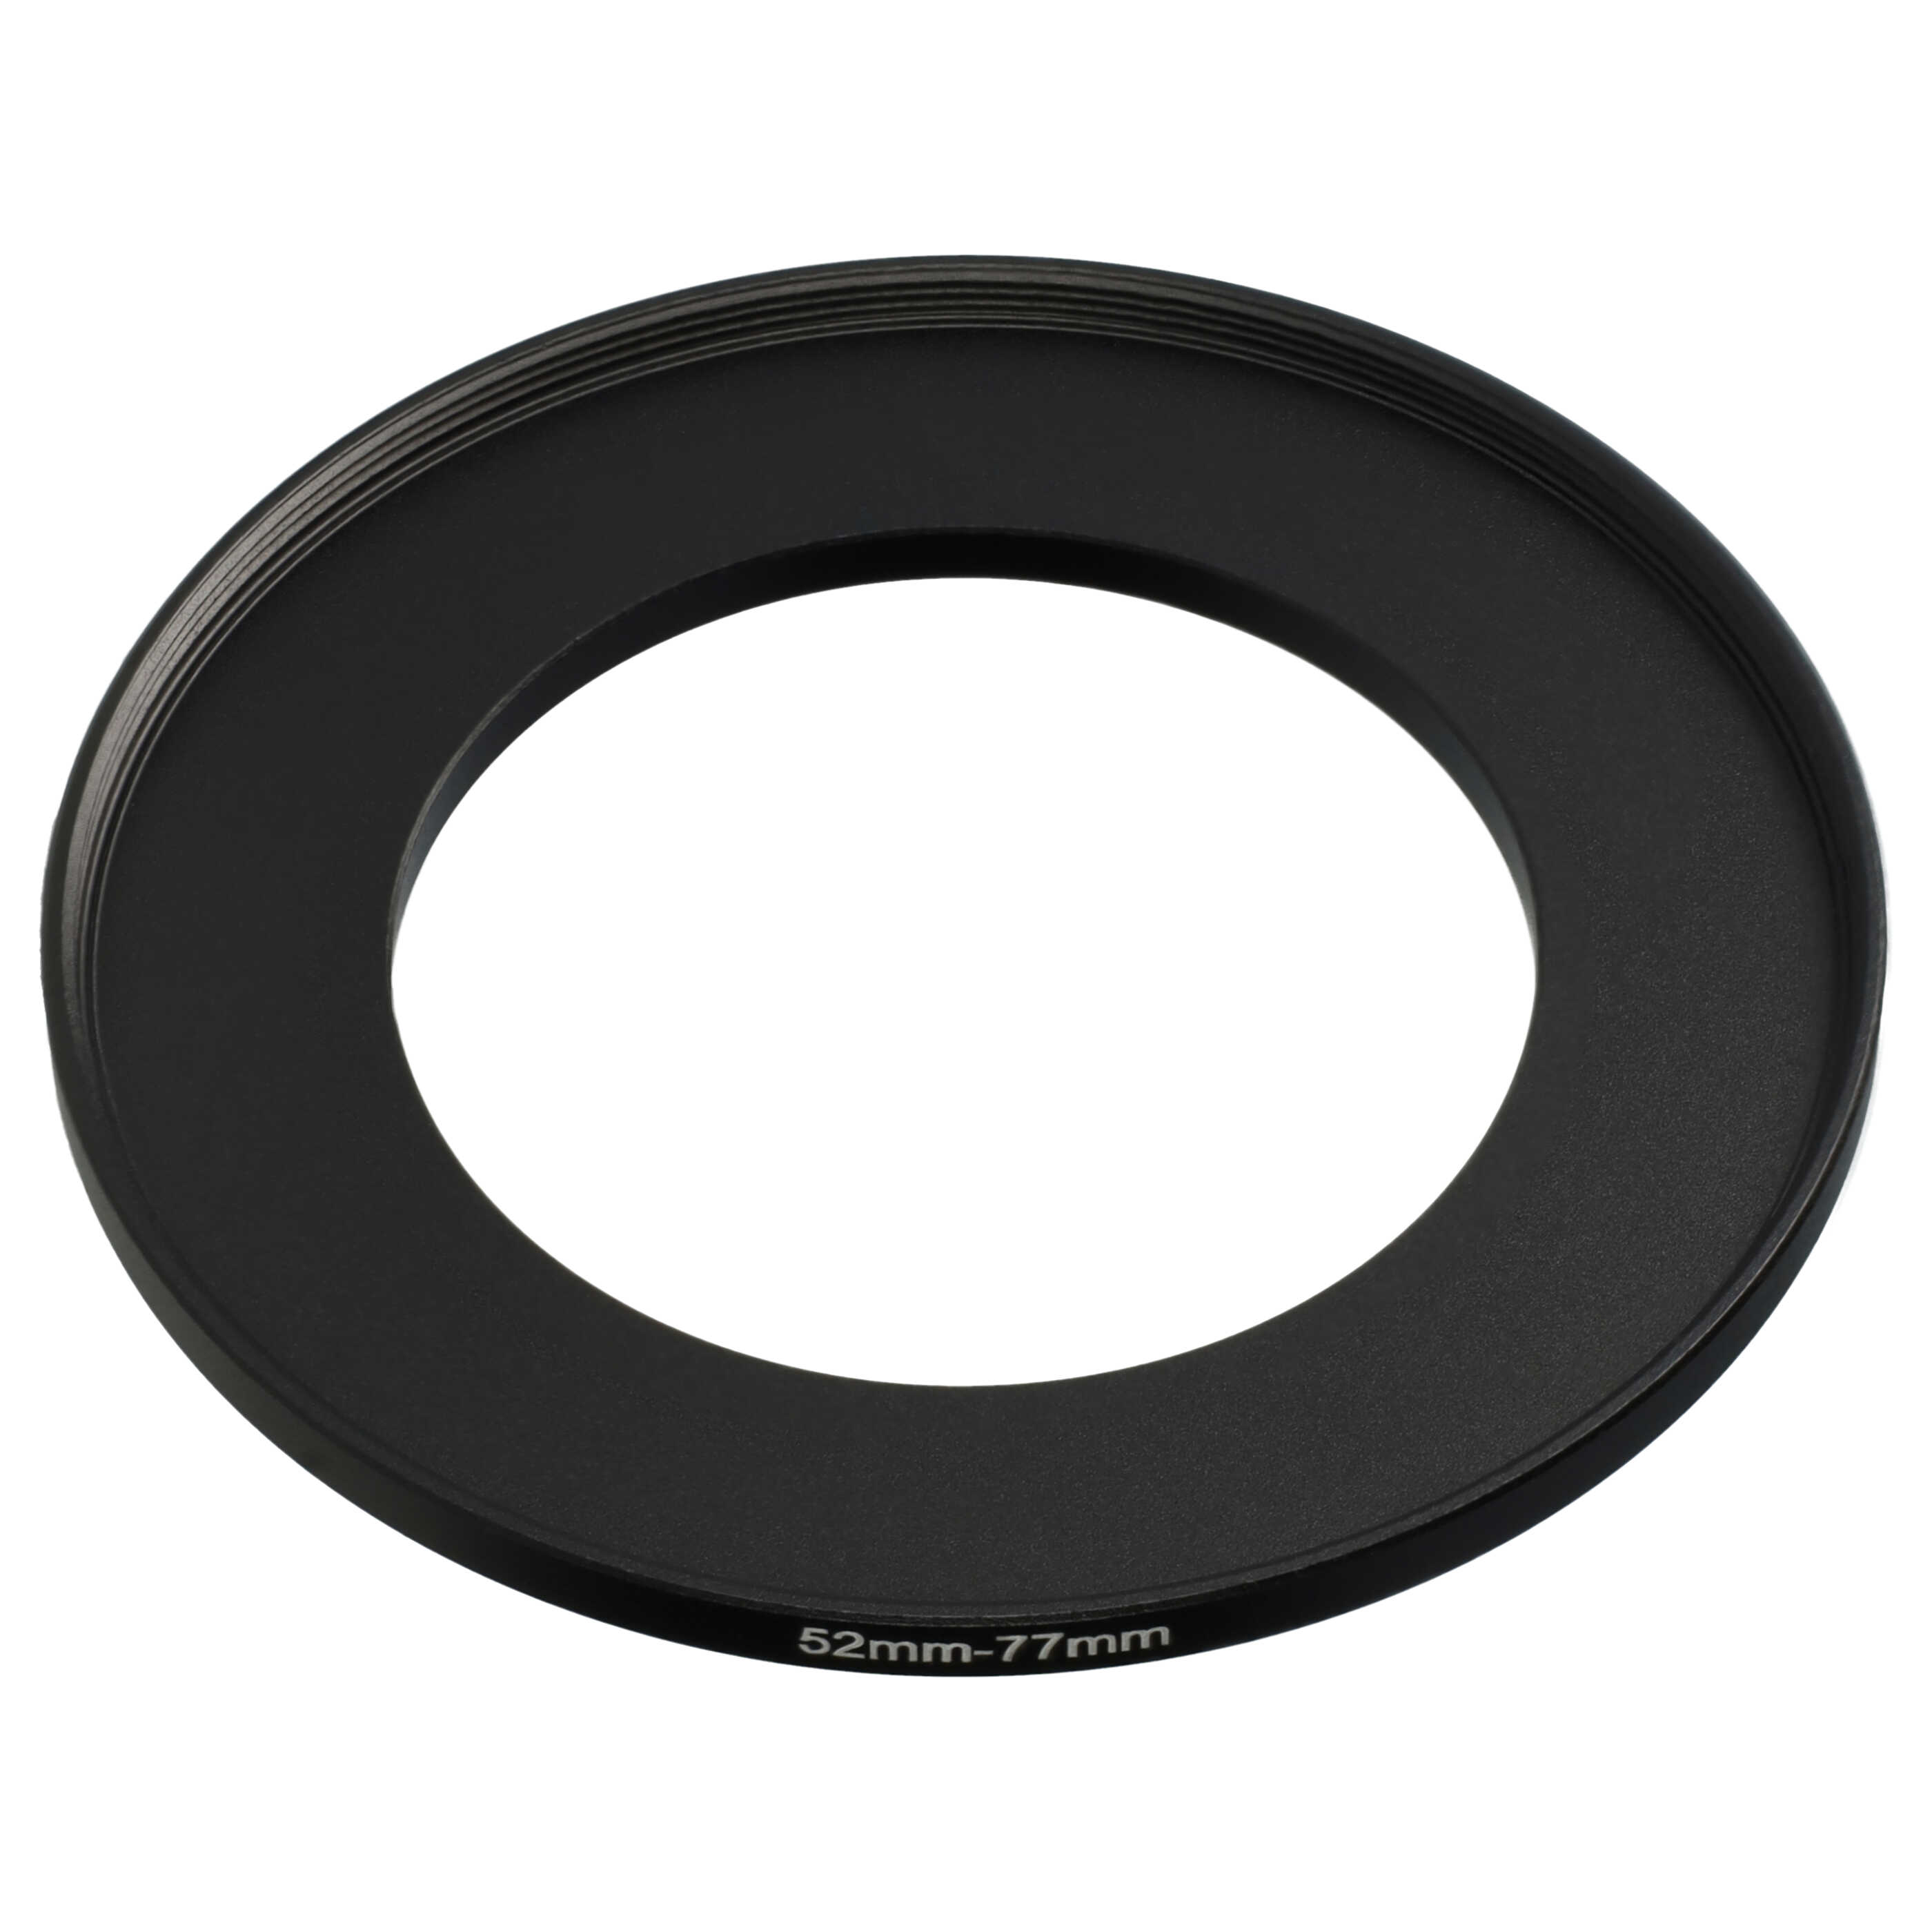 Step-Up Ring Adapter of 52 mm to 77 mmfor various Camera Lens - Filter Adapter